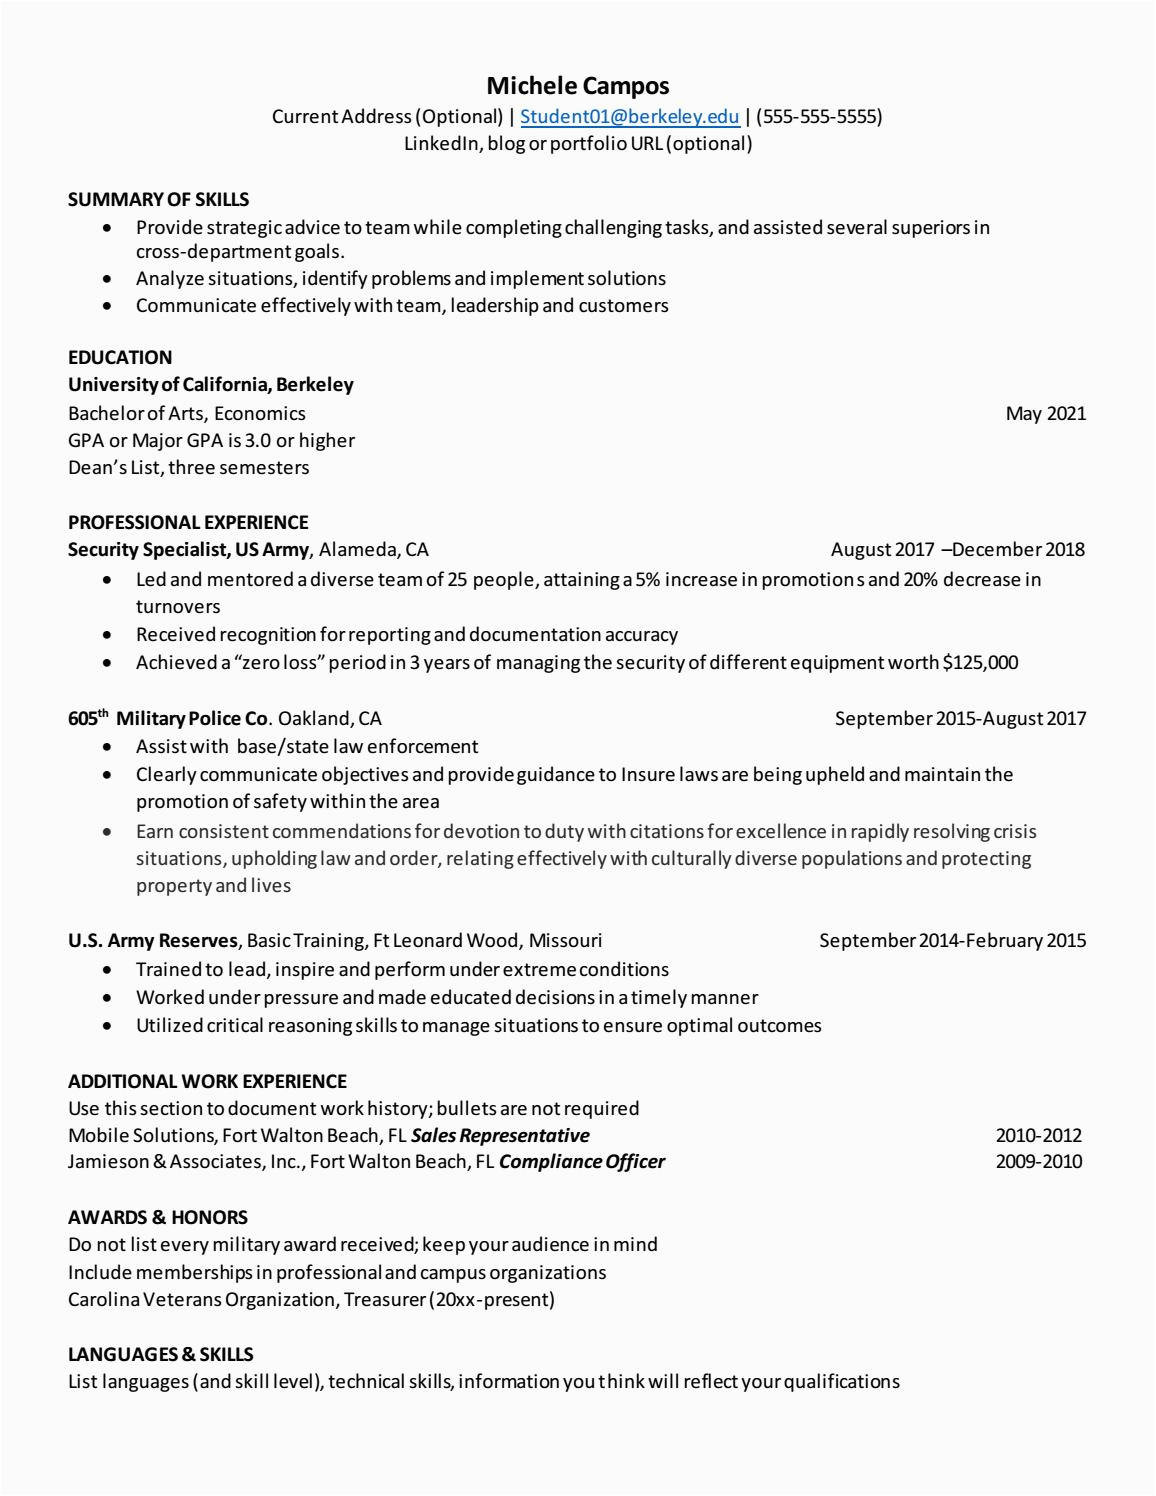 Resume Samples for someone who Was In the Military Veteran Resume Highlighting Transferable Military Experience by